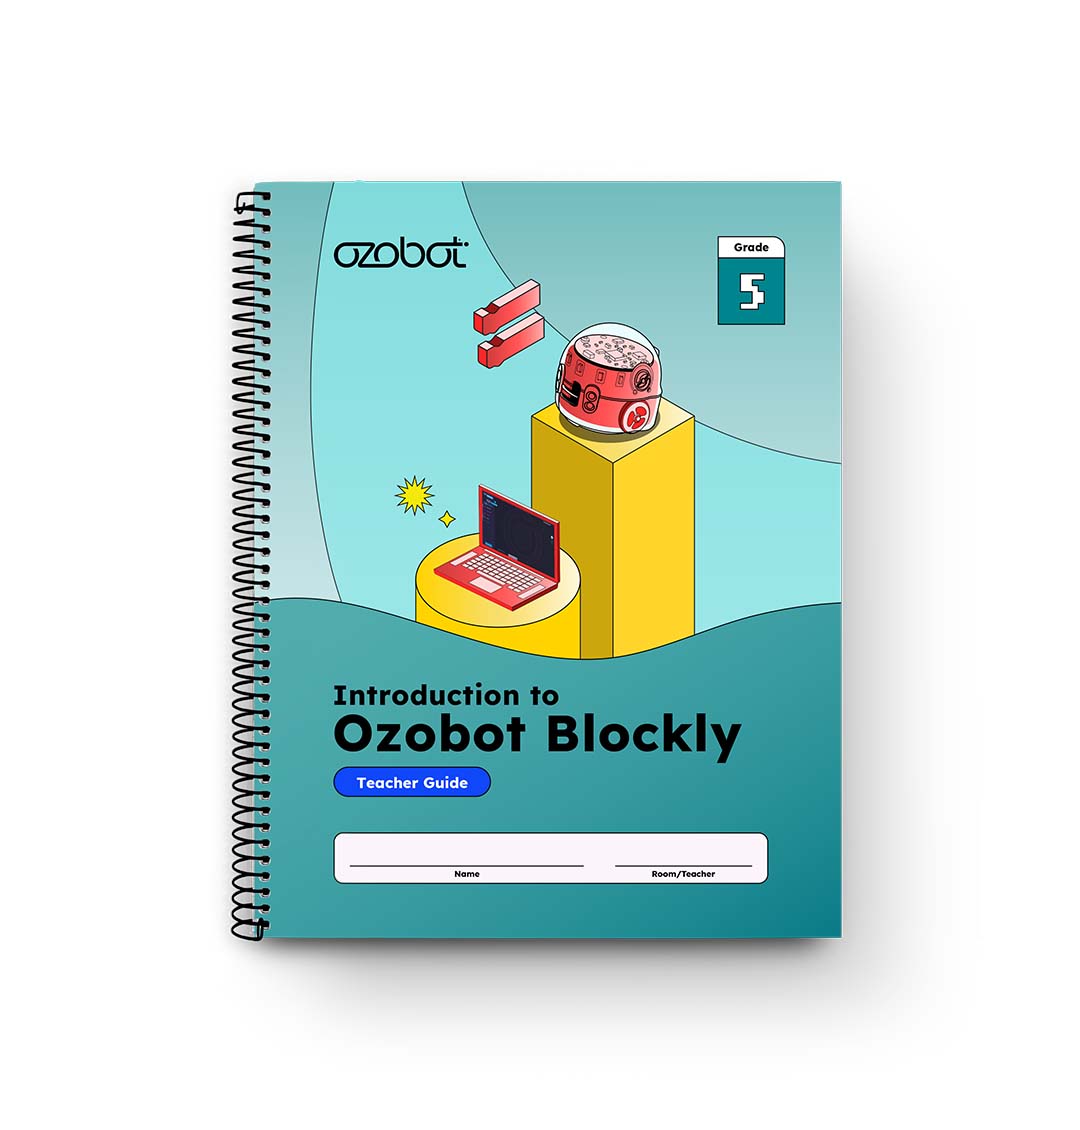 Introduction to Blockly curriculum teacher guide fifth grade answer key - easy coding activities for beginners by Ozobot